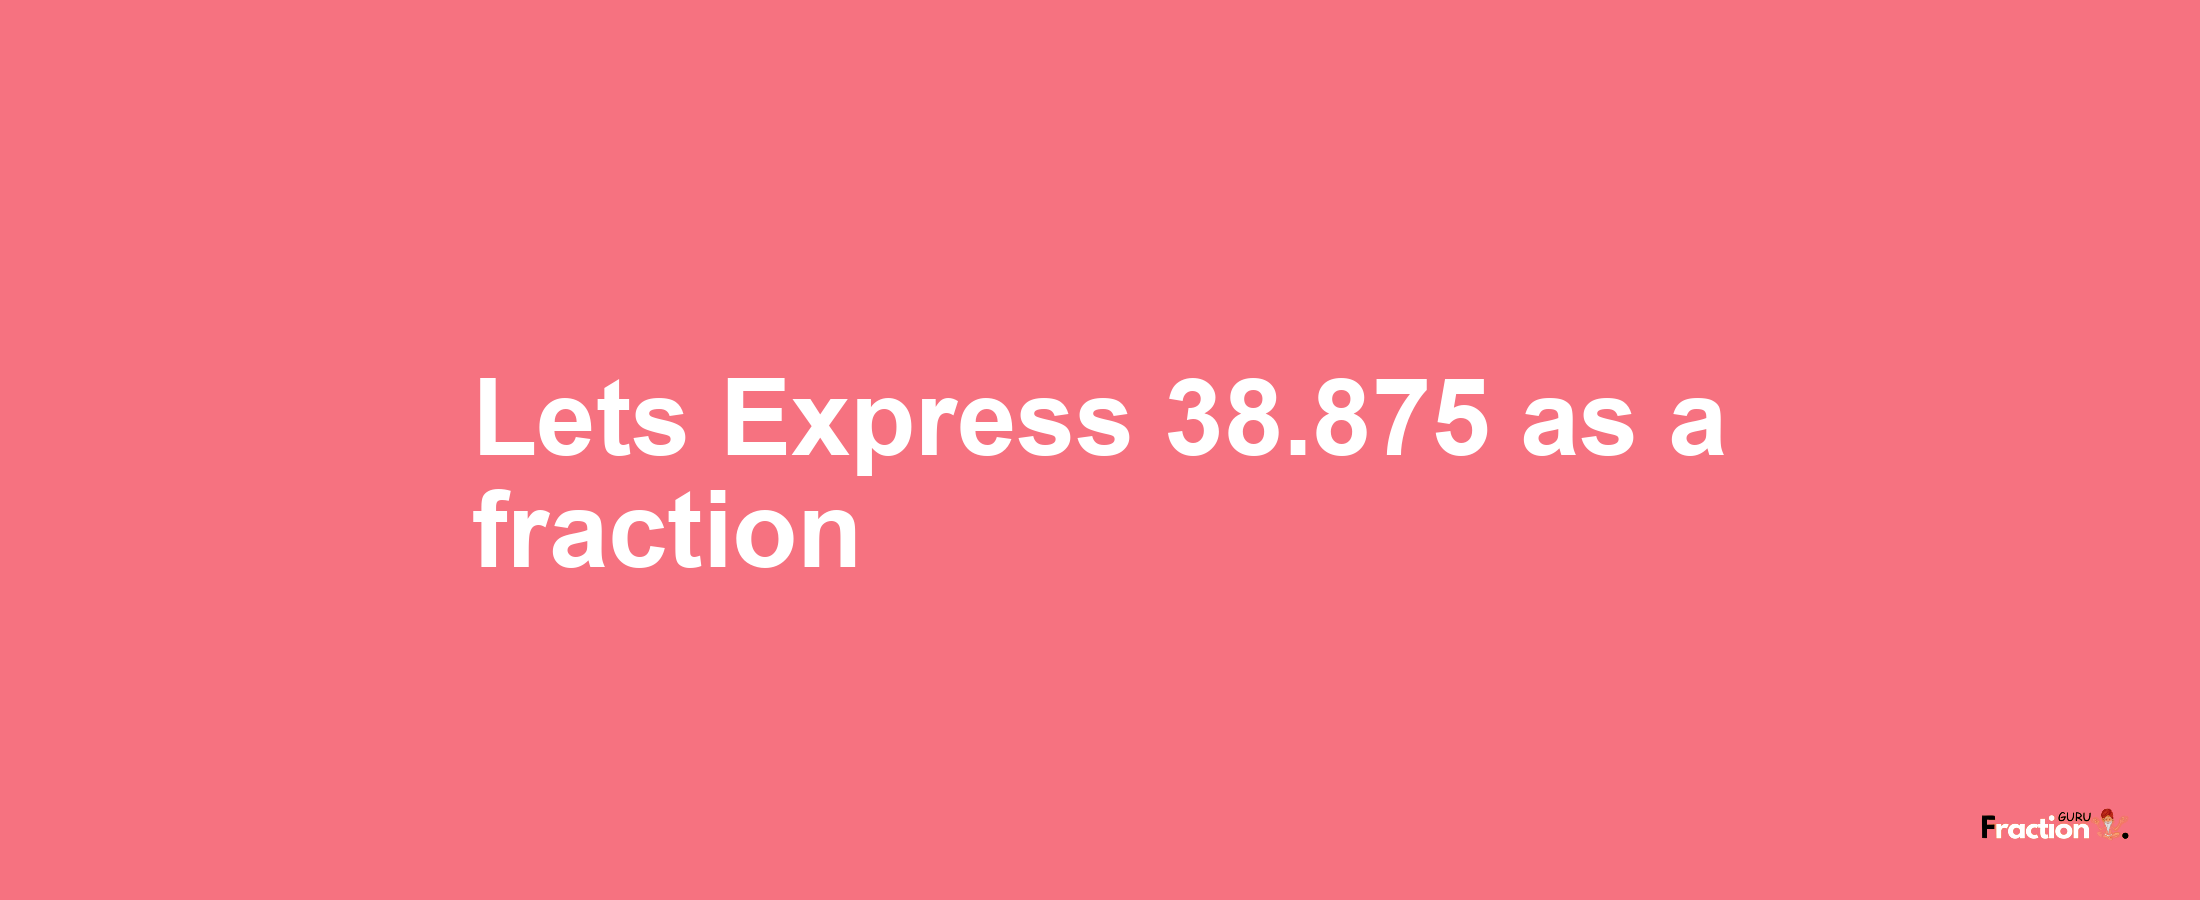 Lets Express 38.875 as afraction